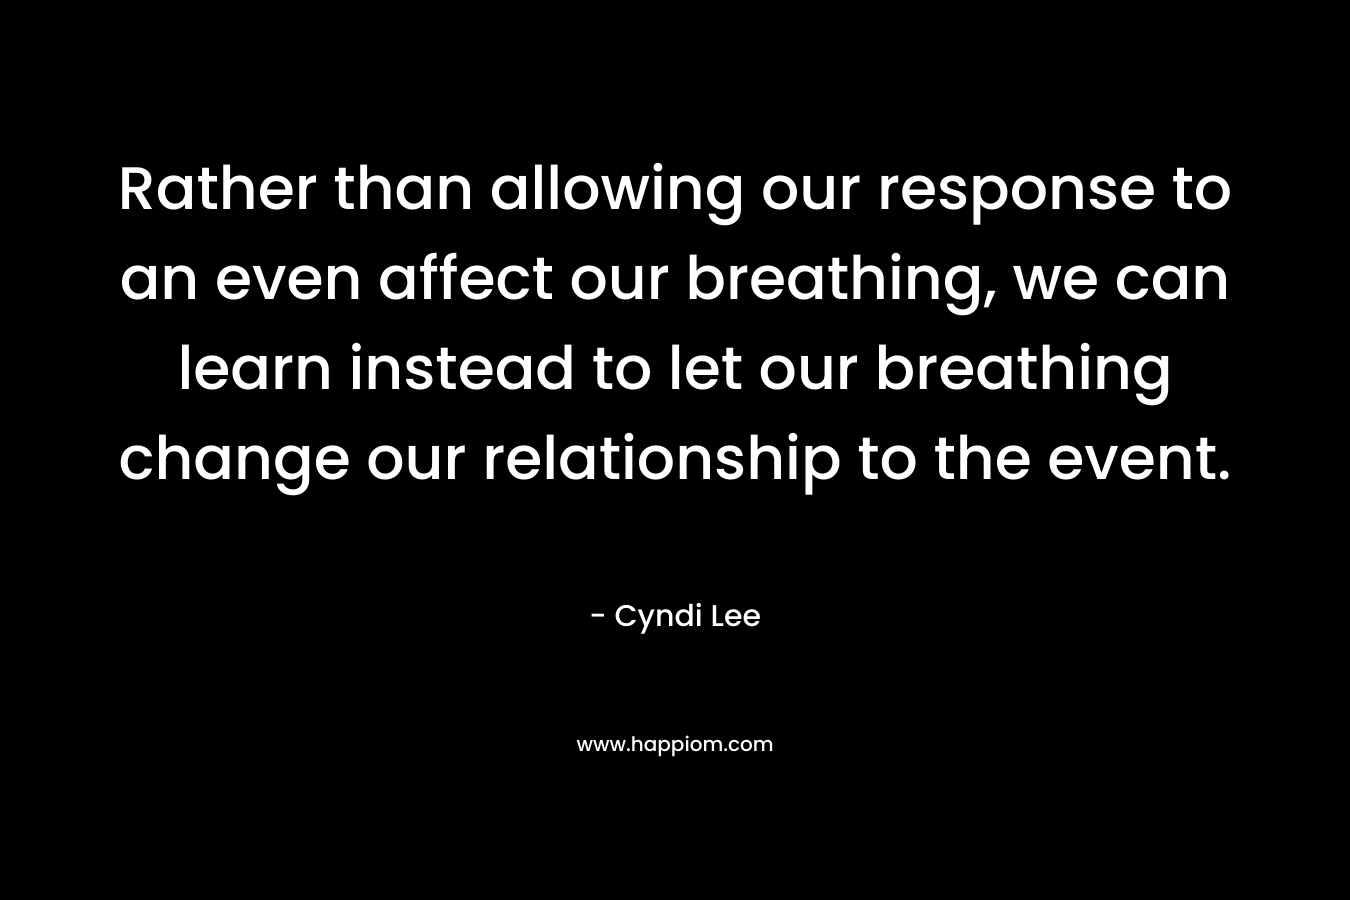 Rather than allowing our response to an even affect our breathing, we can learn instead to let our breathing change our relationship to the event.